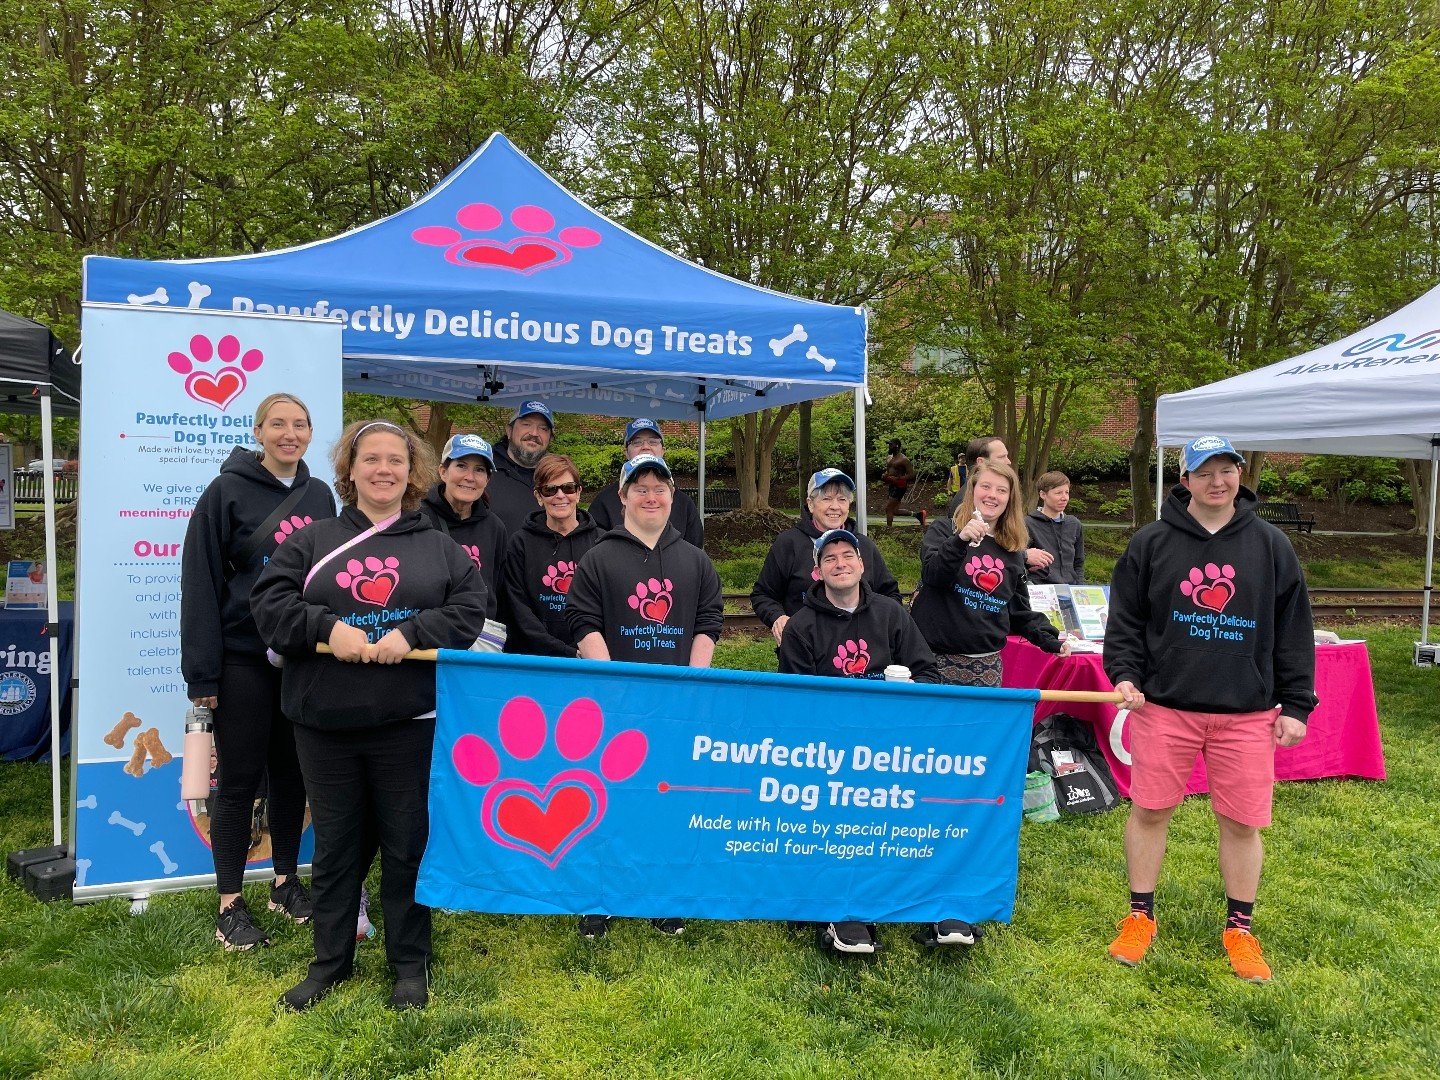 What a fun day we had at the @alxdogwalk!! 🐾

This is such a great event every year, getting to connect with dog lovers and their pawfect pups.

It was an honor to be asked to lead the walk again, and we hope everyone enjoyed trying our treats! 💙

